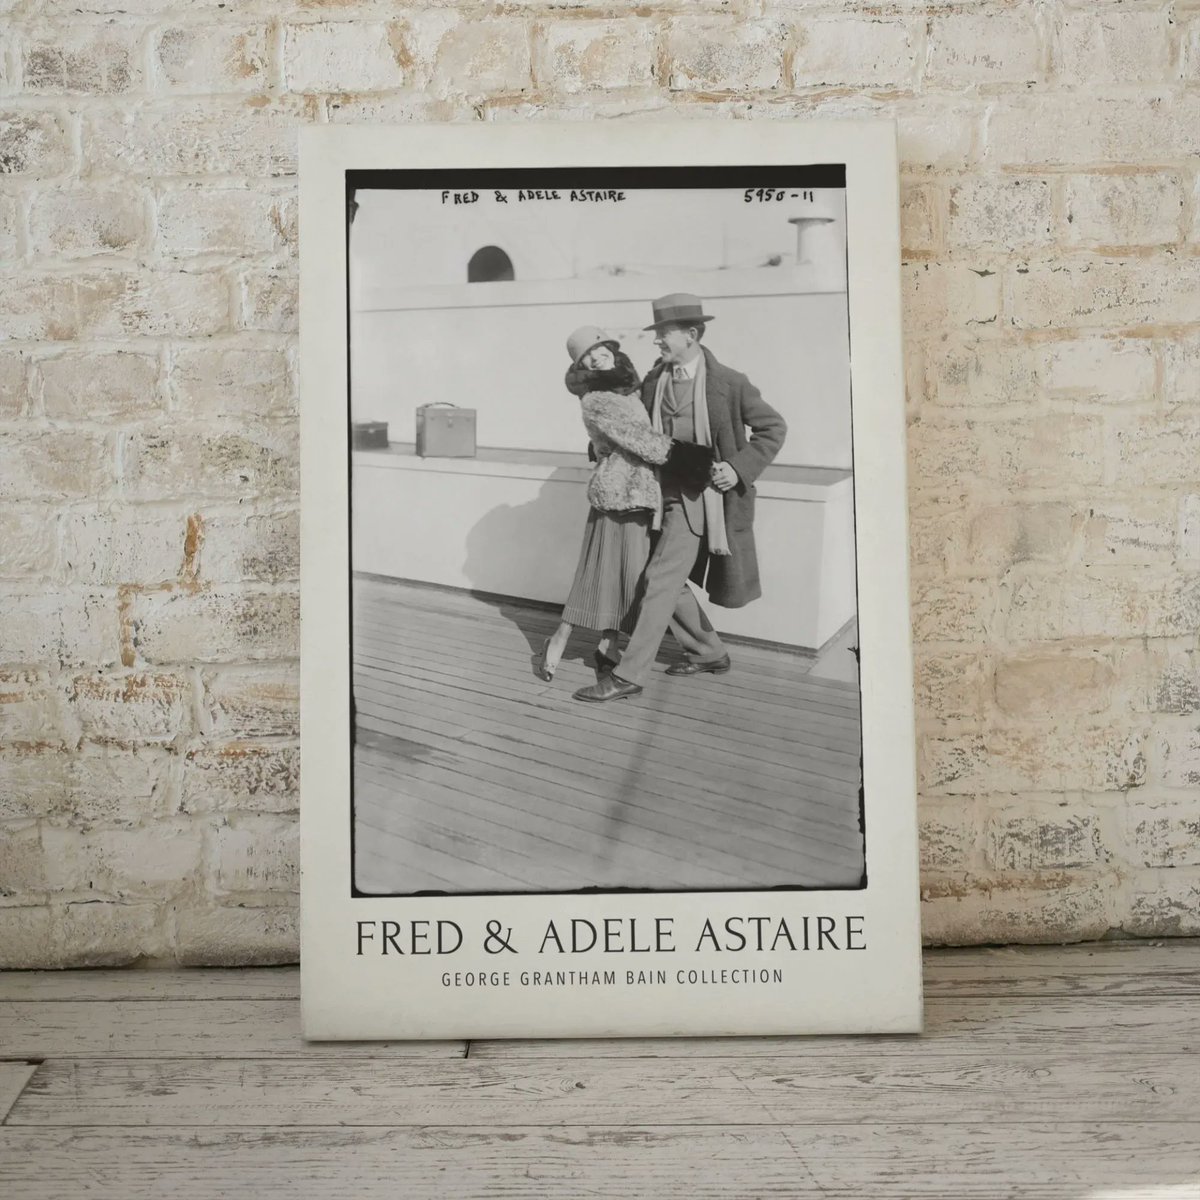 No matter how many movie tickets they shift or magazine covers they decorate, there's no performer today that gets even close to the icons of the glory days. etsy.me/3yFJAnZ

#Fred #AdeleAstaire #fashionhistory #1930s #silentcinema #silentcomedy #smellynoises